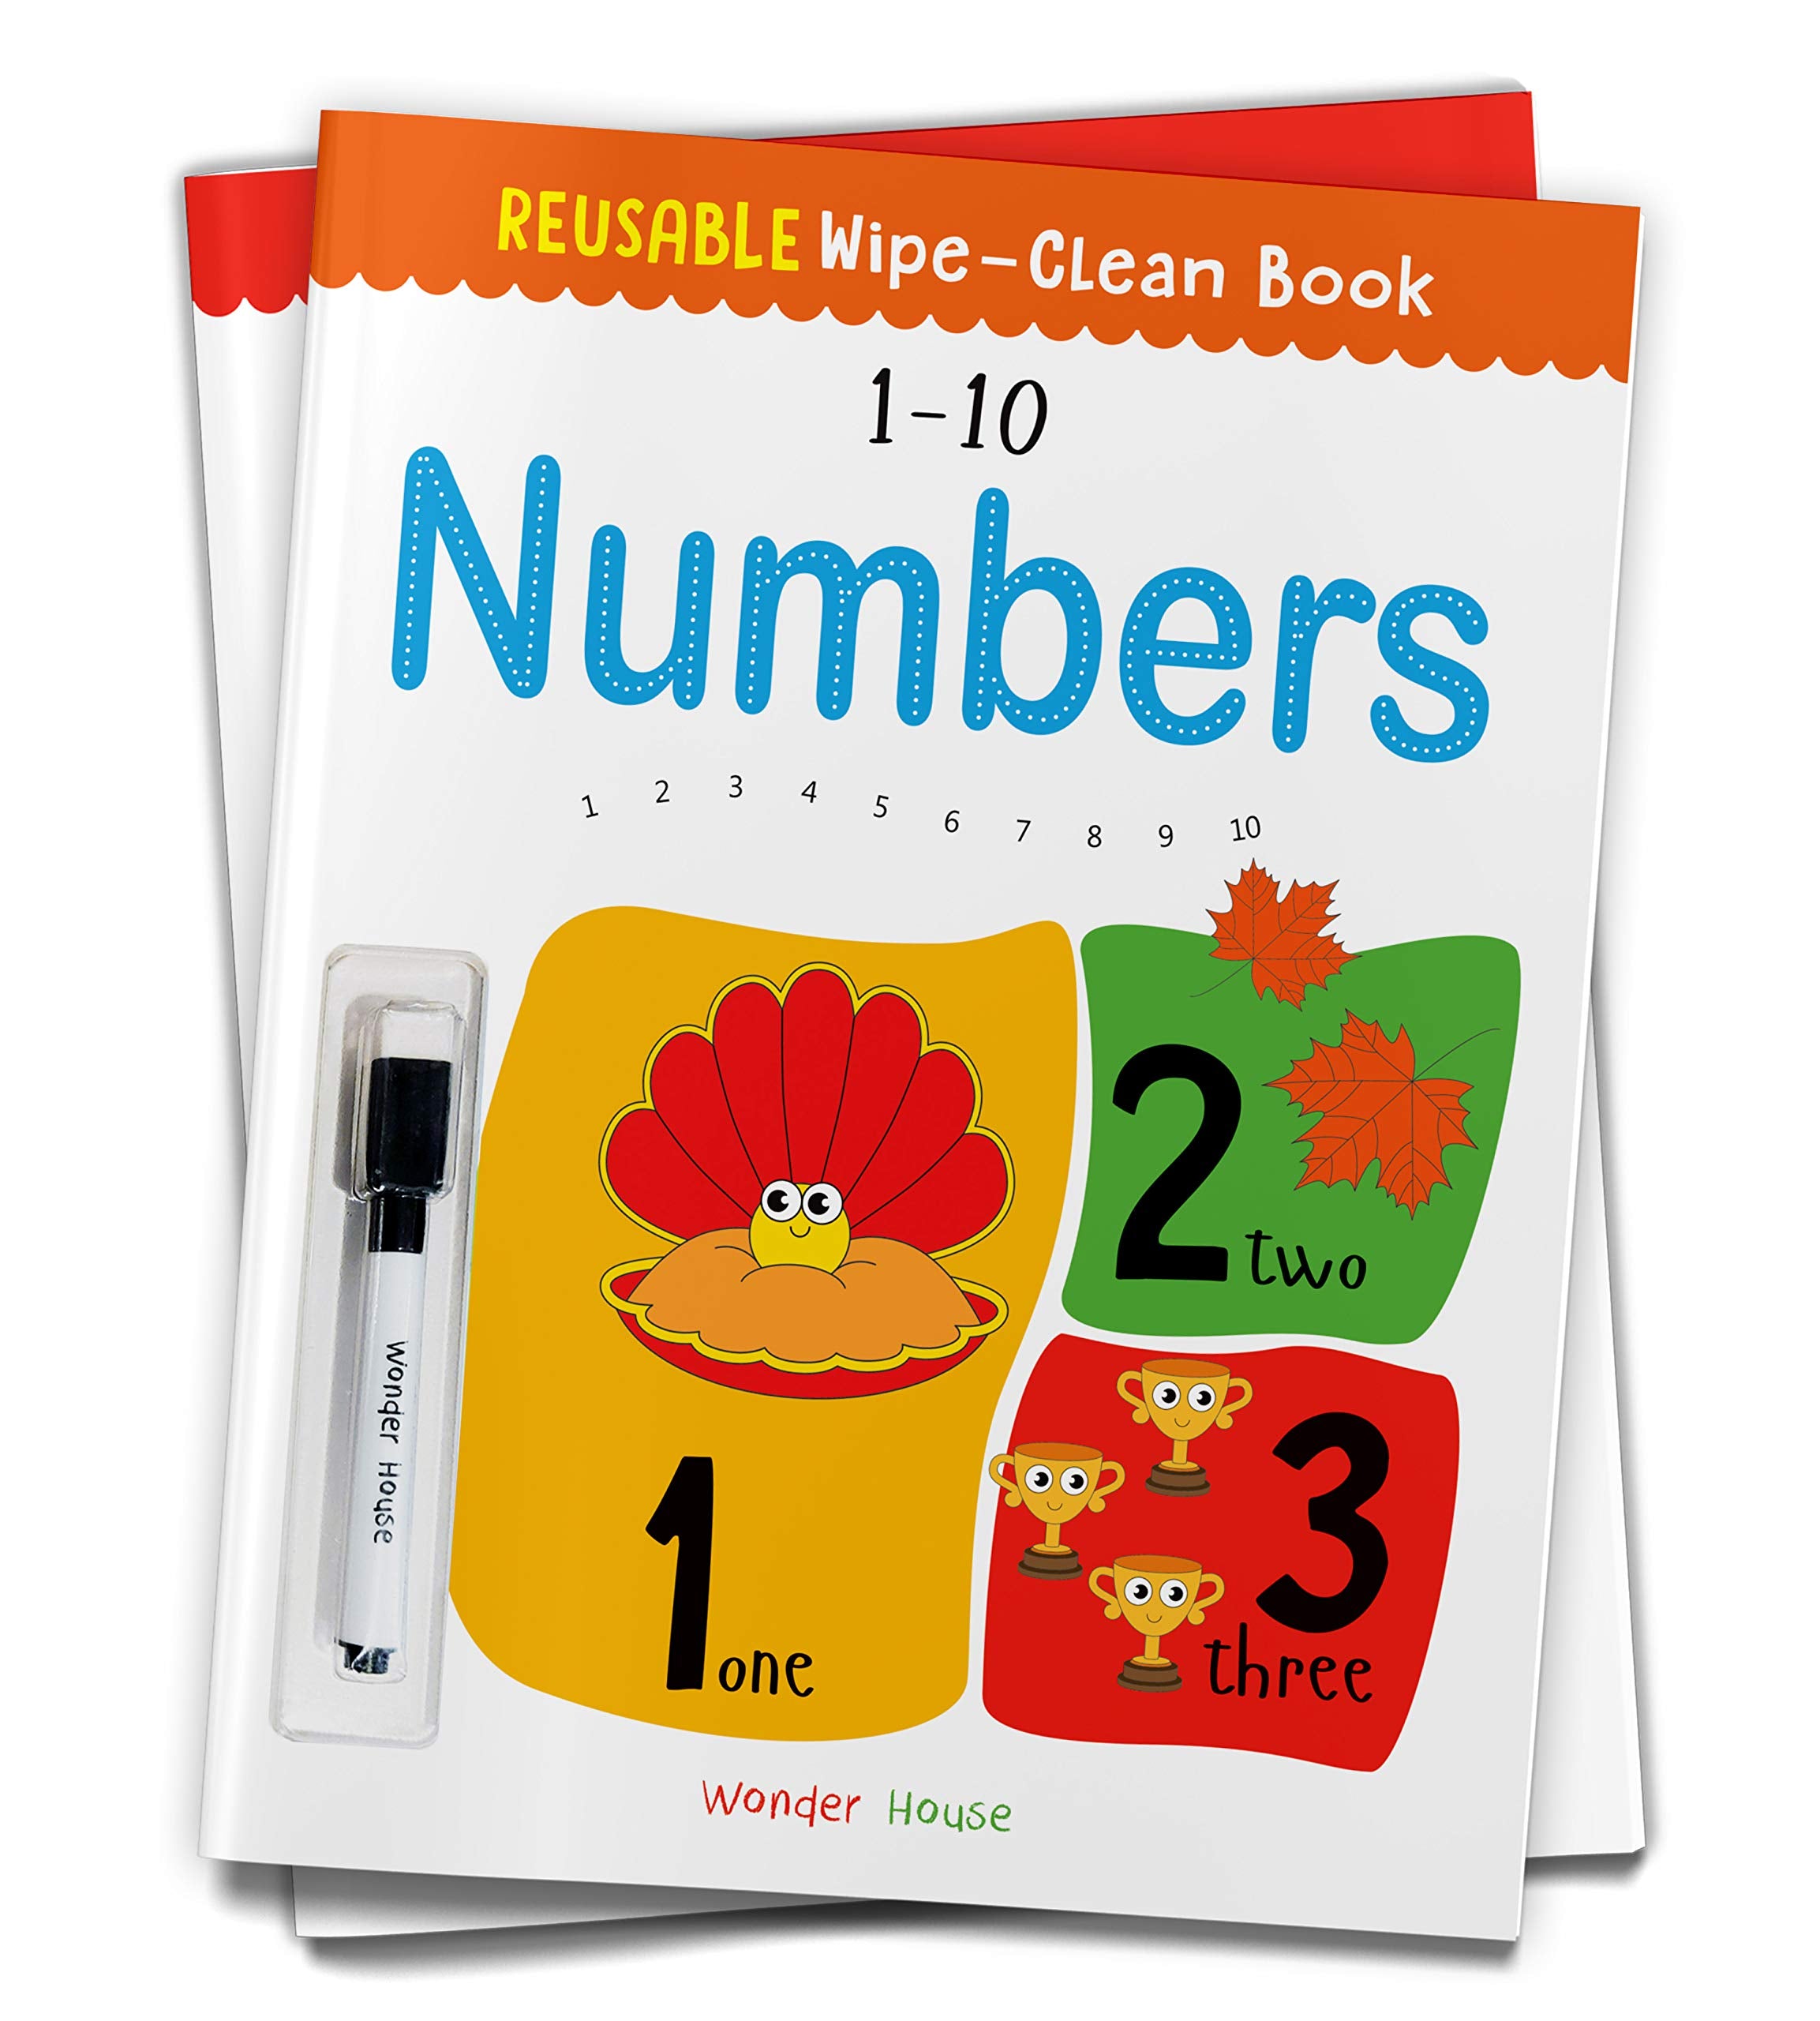 Reusable Wipe And Clean Book 1-10 Numbers